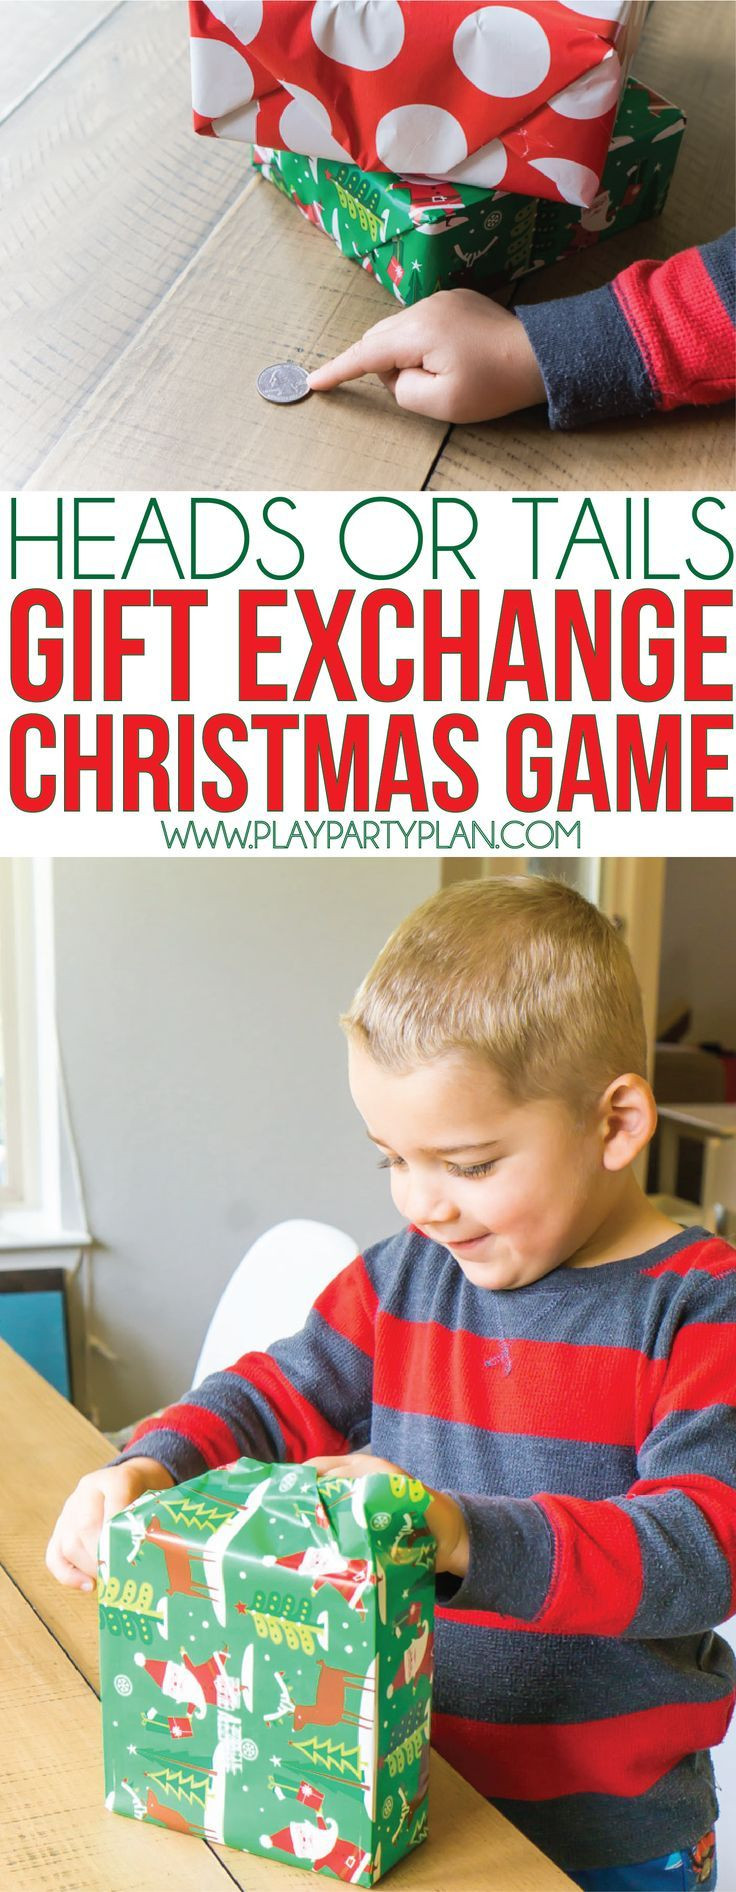 Holiday Gift Exchange Ideas For Groups
 Change up your t exchange tradition with this fun white